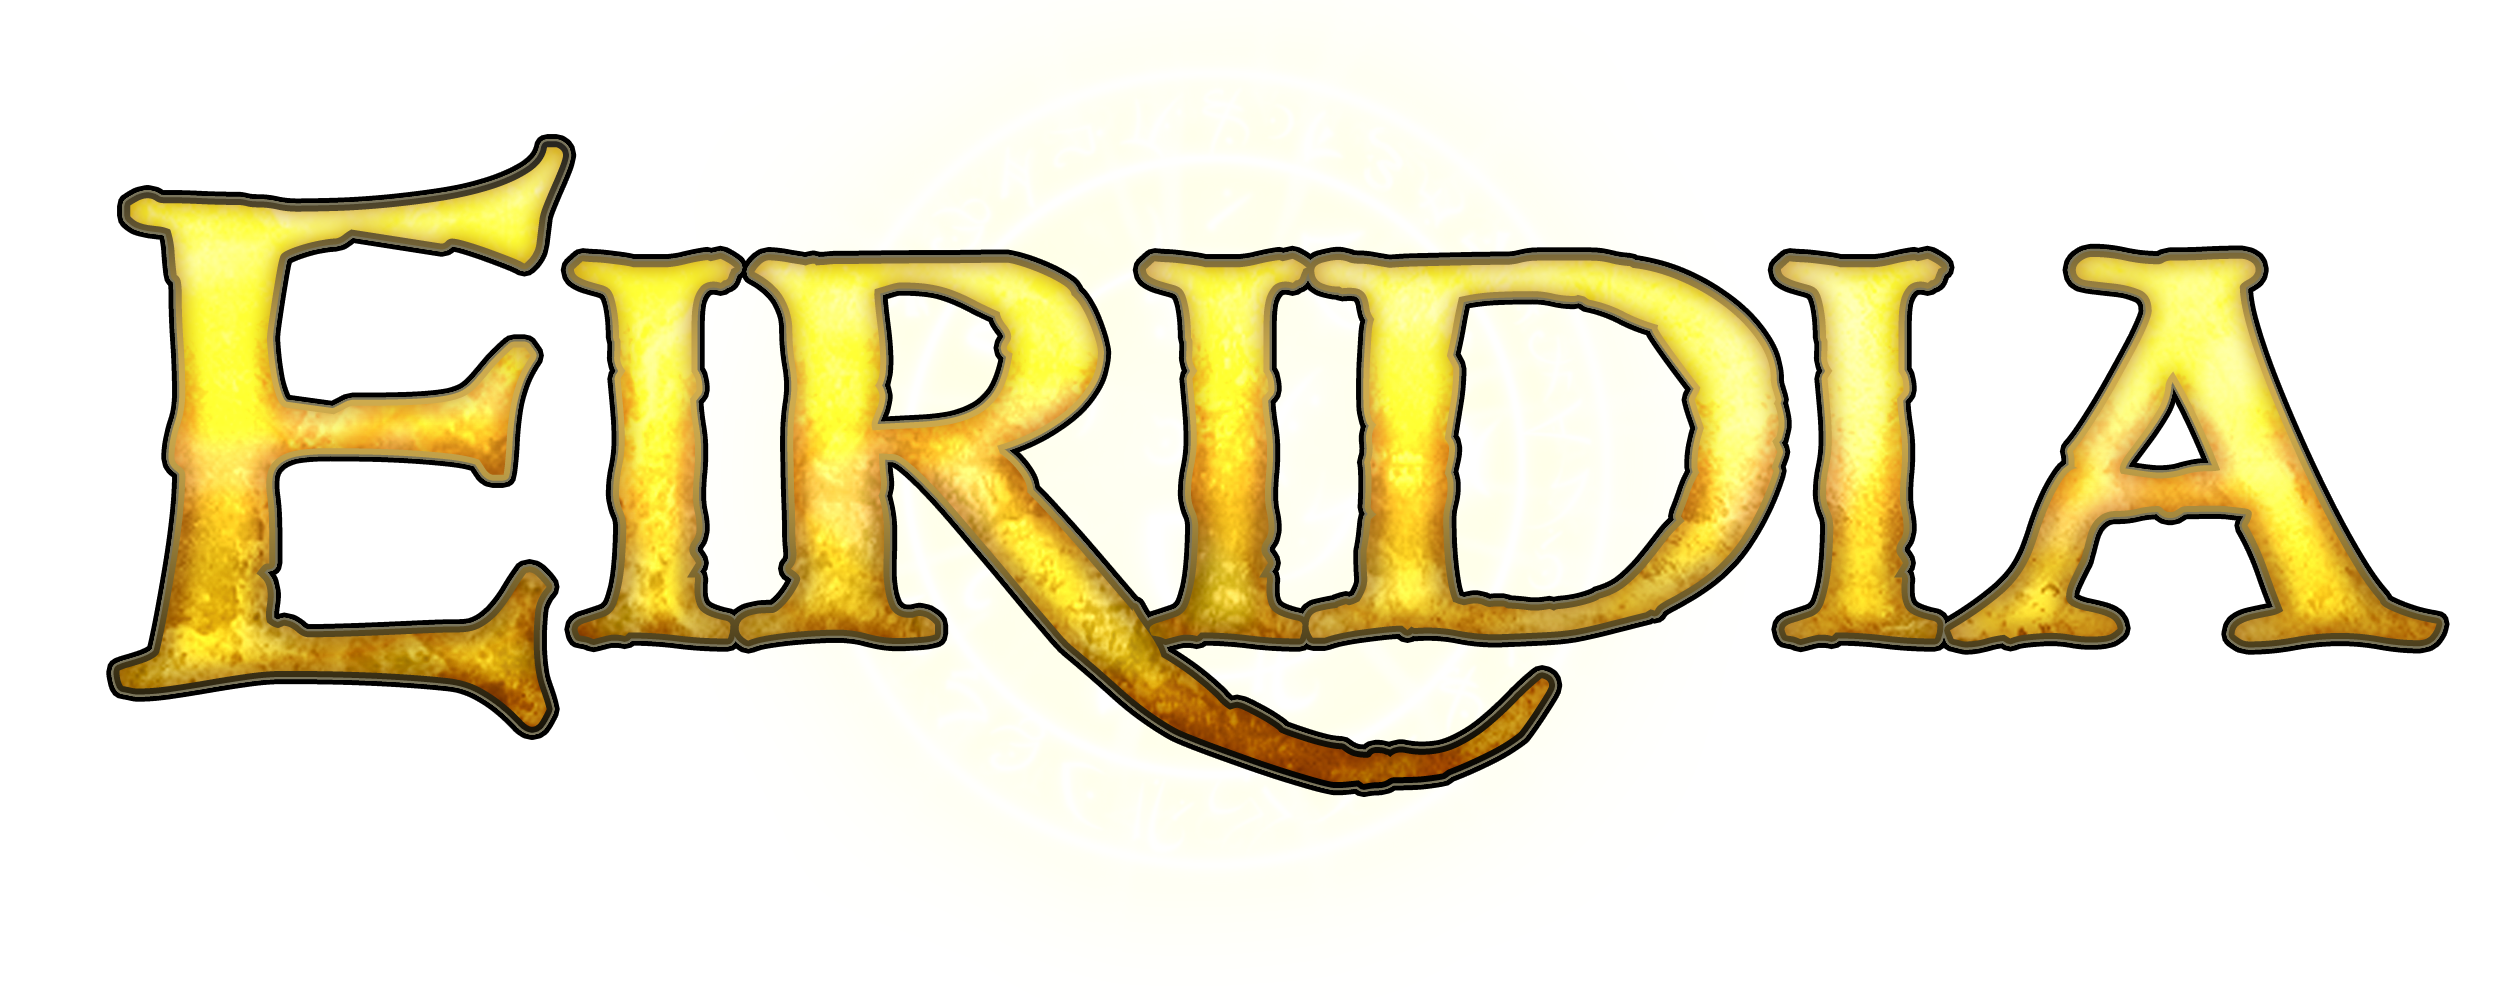 The logo for Eiridia, the first iteration of what became Ingenium